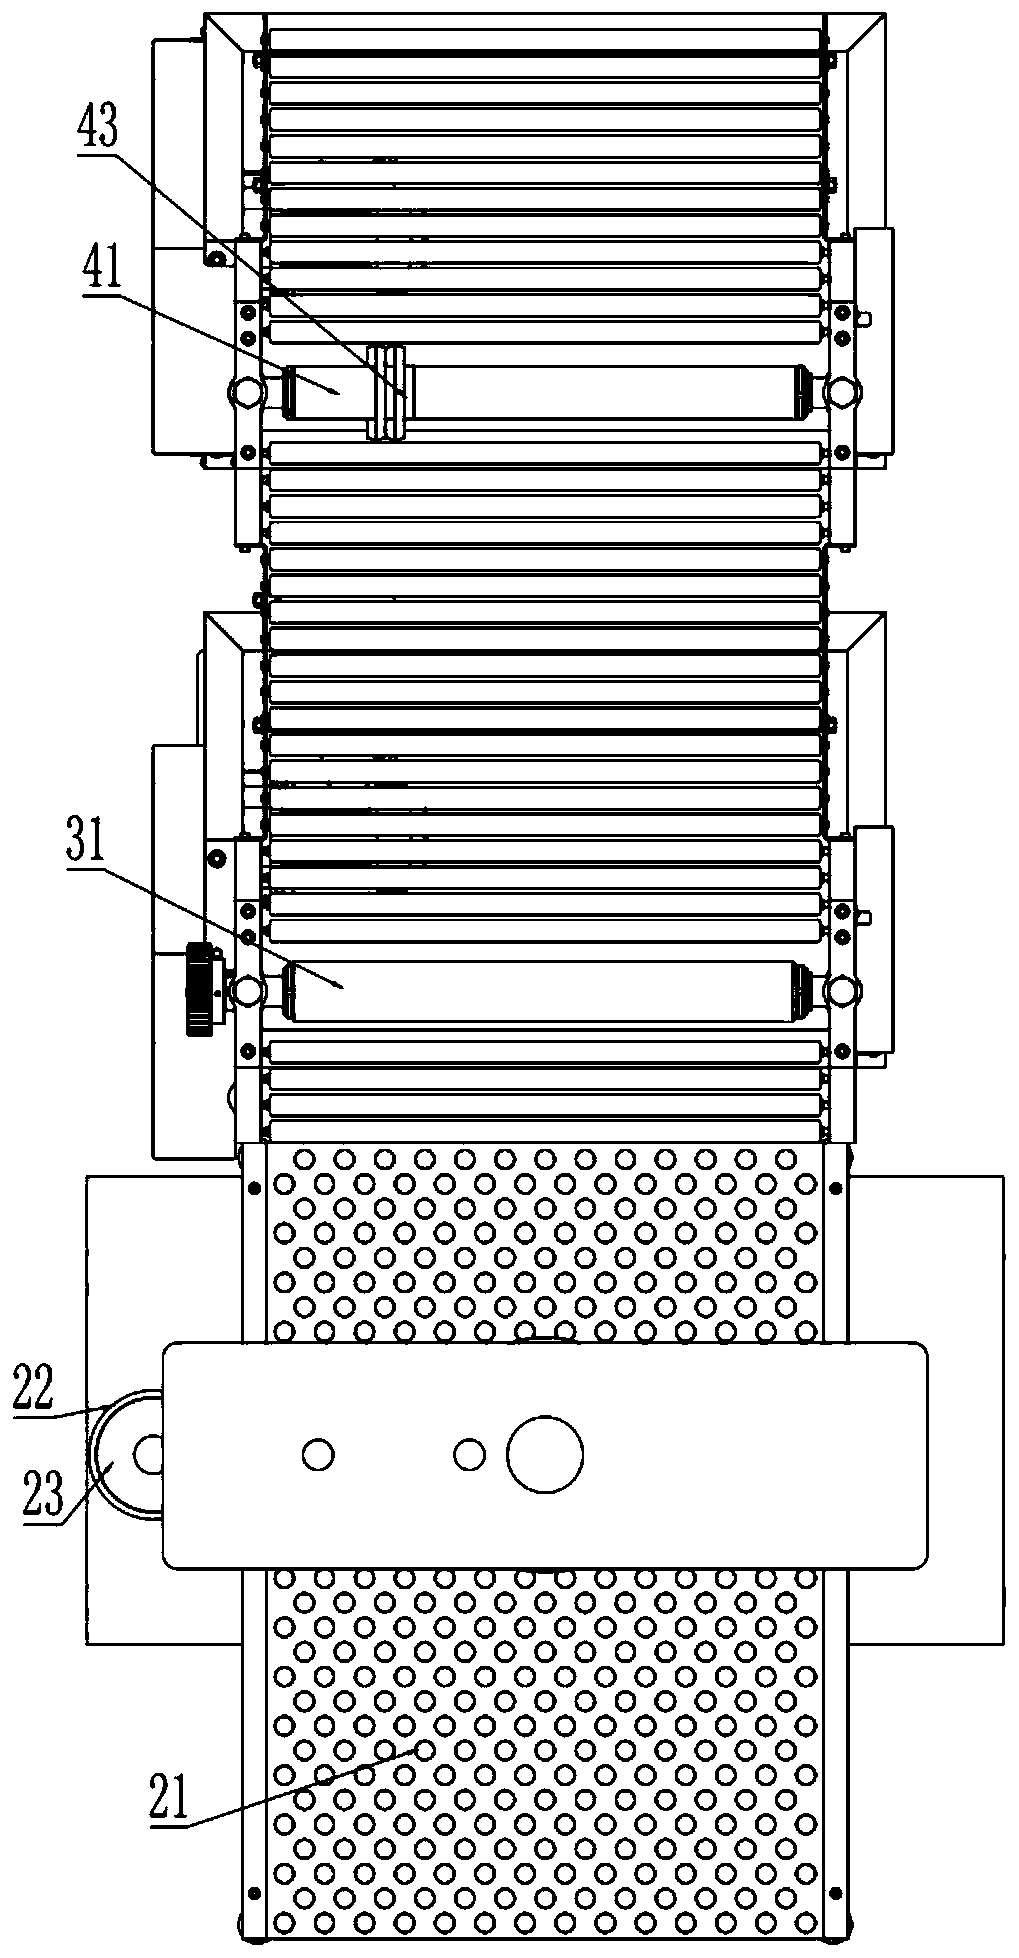 Steel plate cutting device